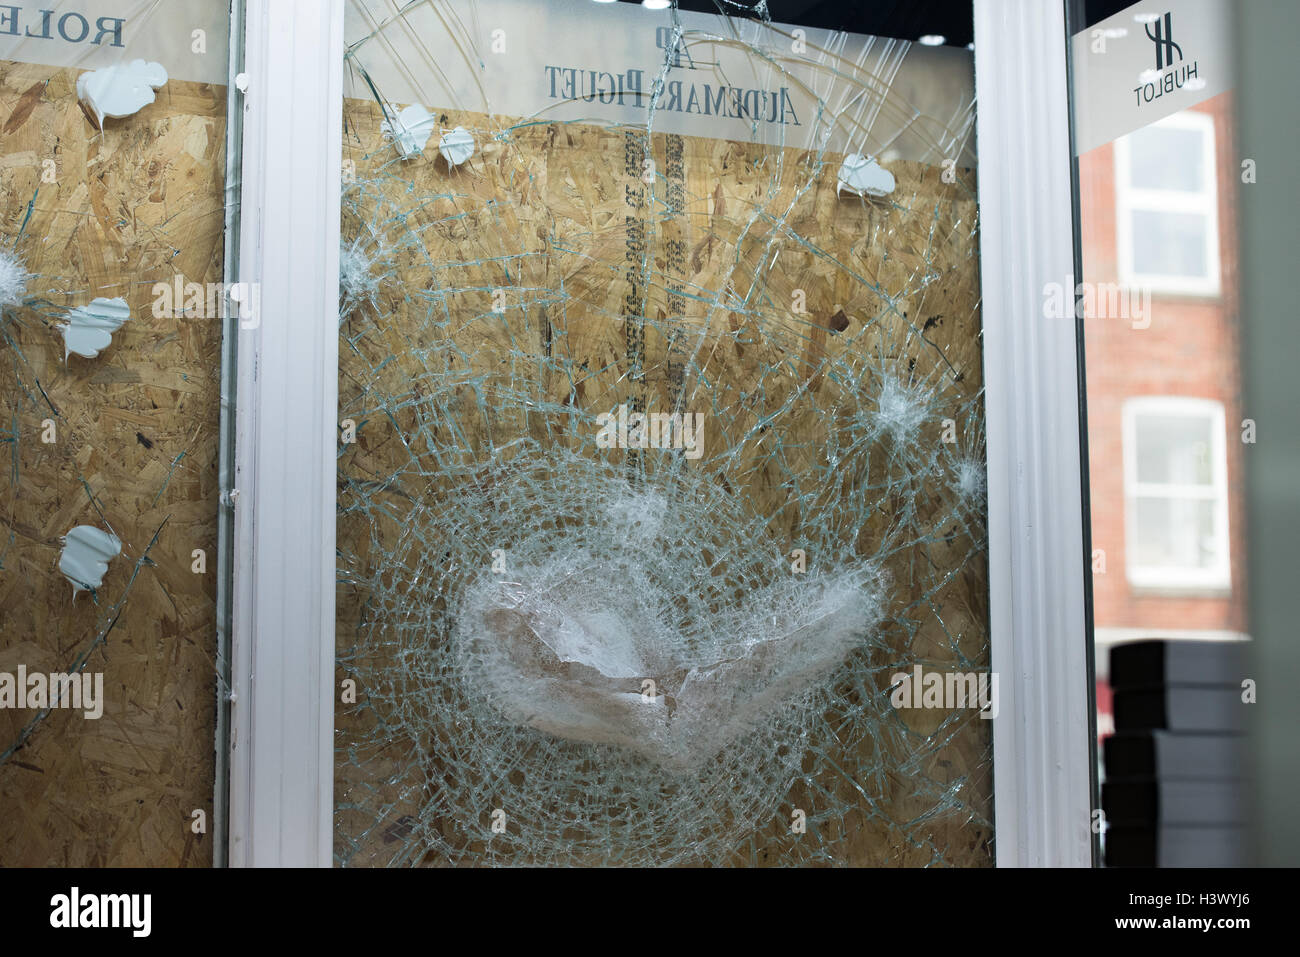 Brentwood, Essex, 12th October 2016: Thieves used axes to smash their way in to high end jeweler Bonds of Brentwood Credit:  Ian Davidson/Alamy Live News Stock Photo